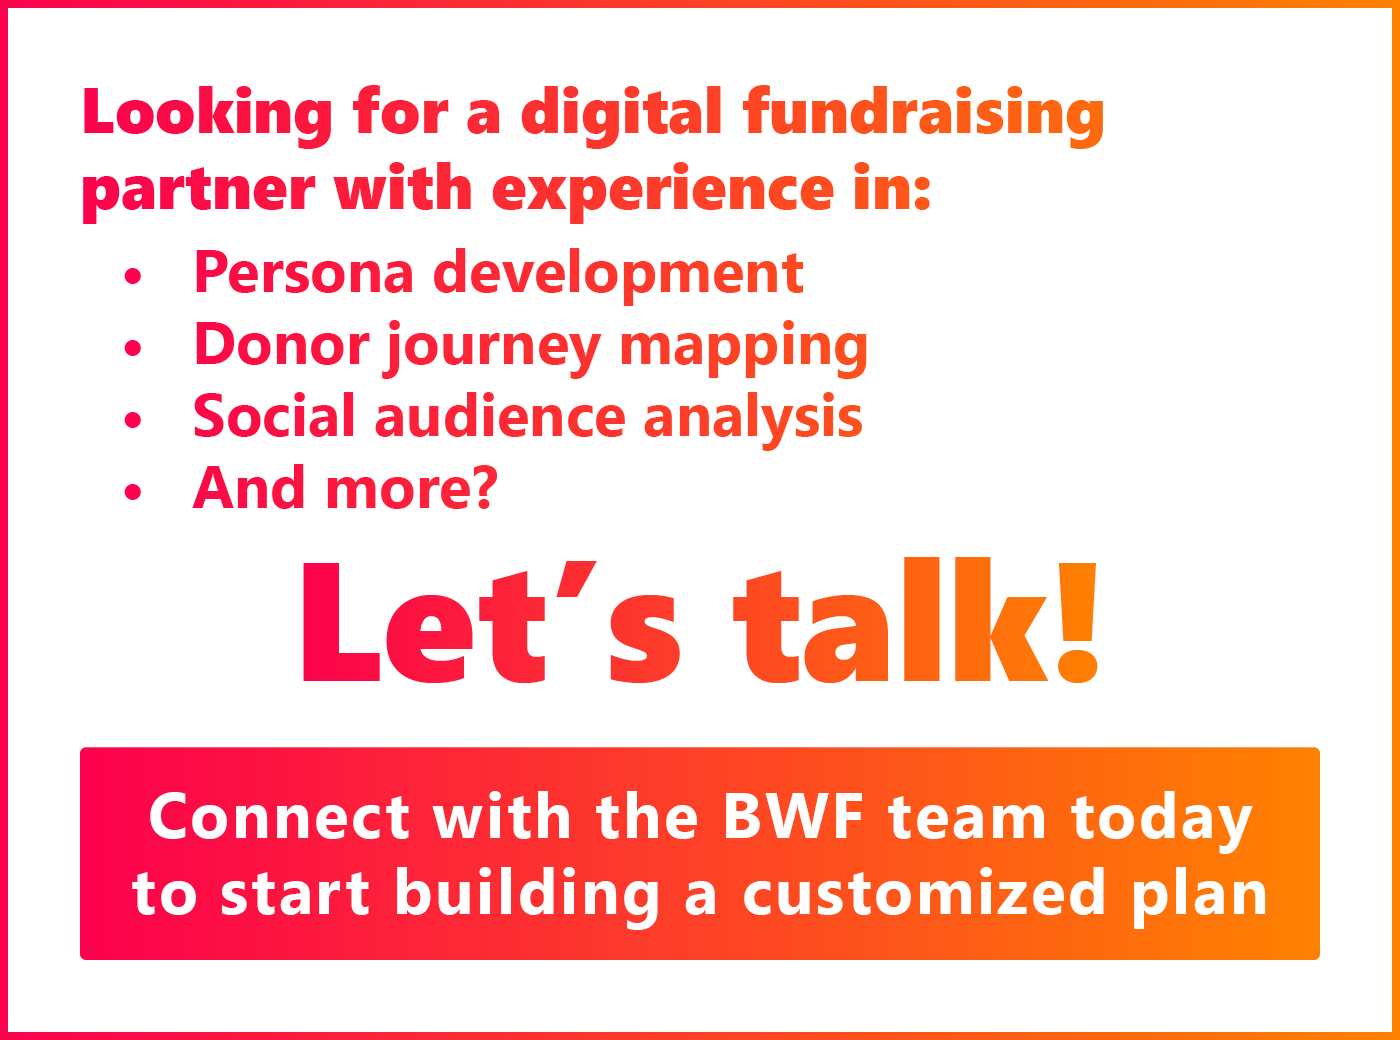 Contact the BWF team here for a personalized digital fundraising plan.